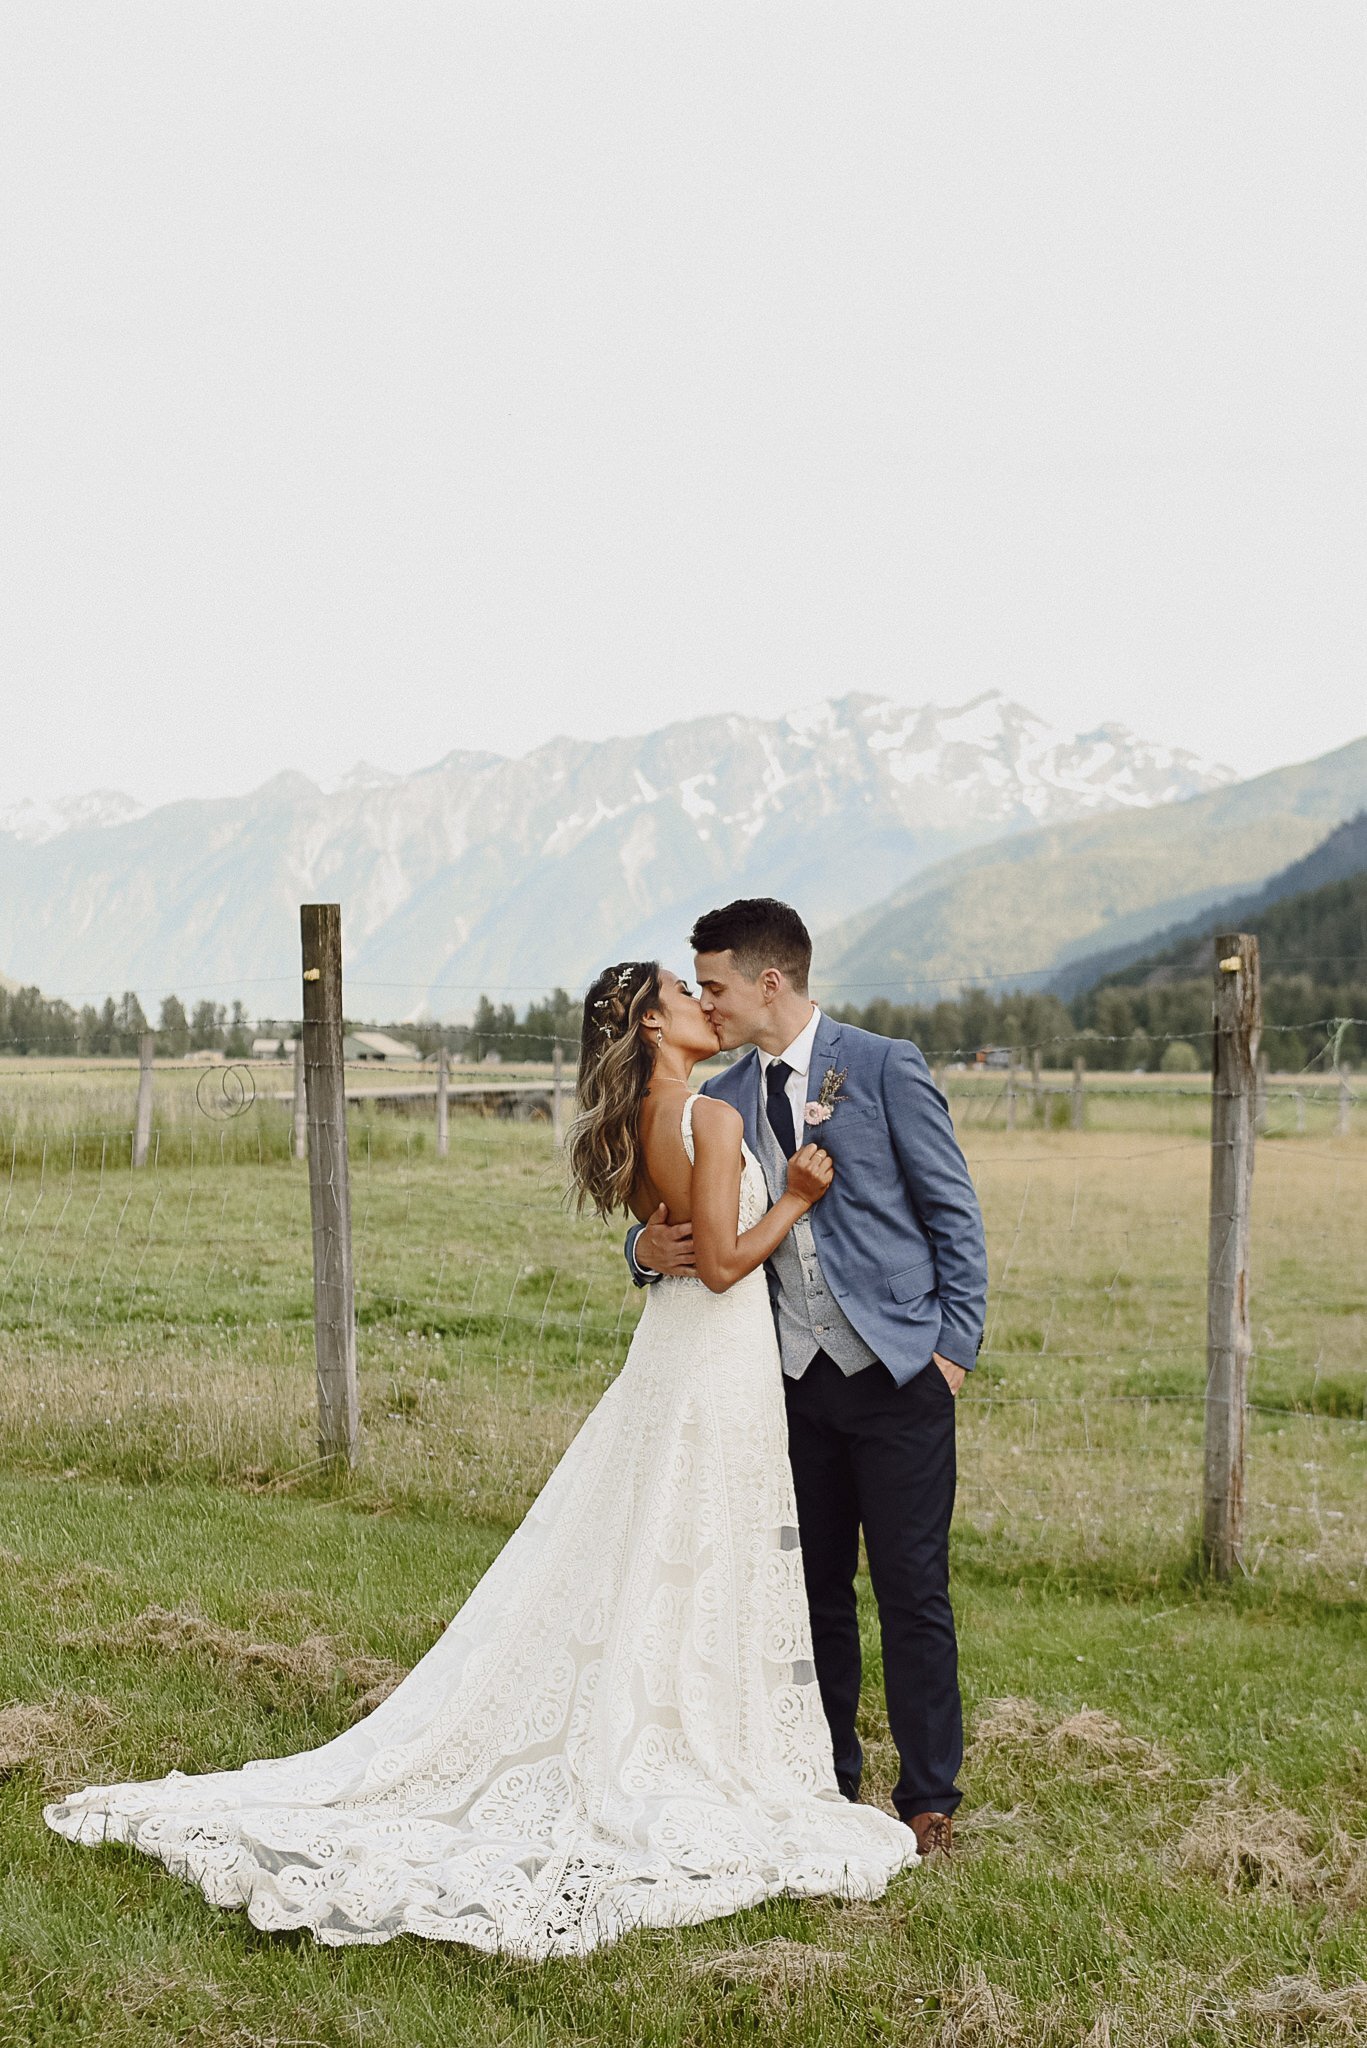 Charming-Pemberton-Helicopter-Elopement-SS-British-Columbia-Rocky-Mountain-Bride-51.jpg